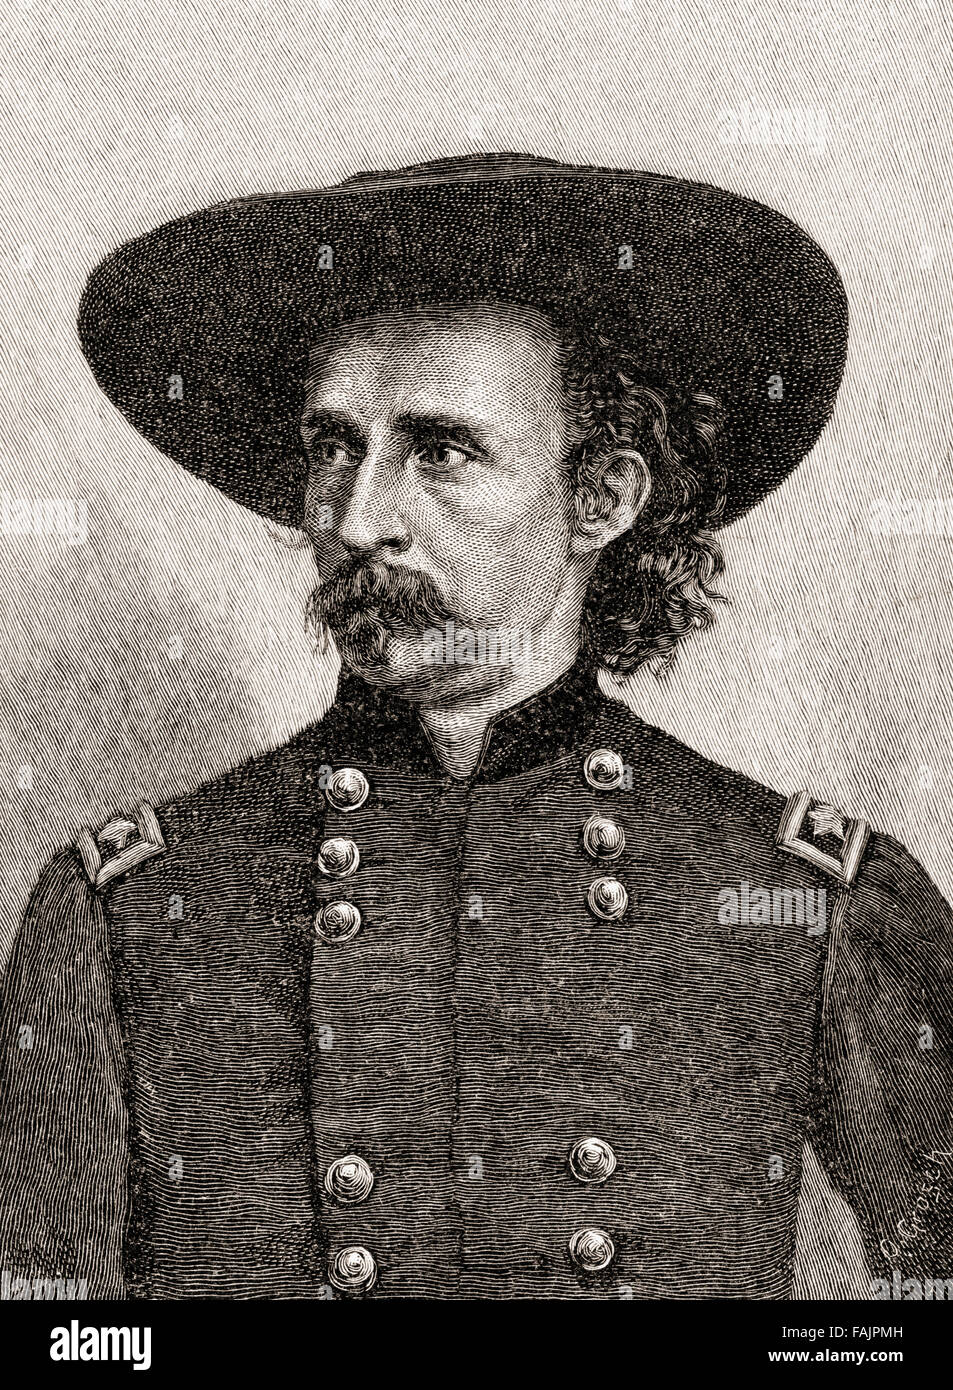 George Armstrong Custer, 1839 – 1876.   United States Army officer and cavalry commander in the American Civil War and the American Indian Wars. Stock Photo